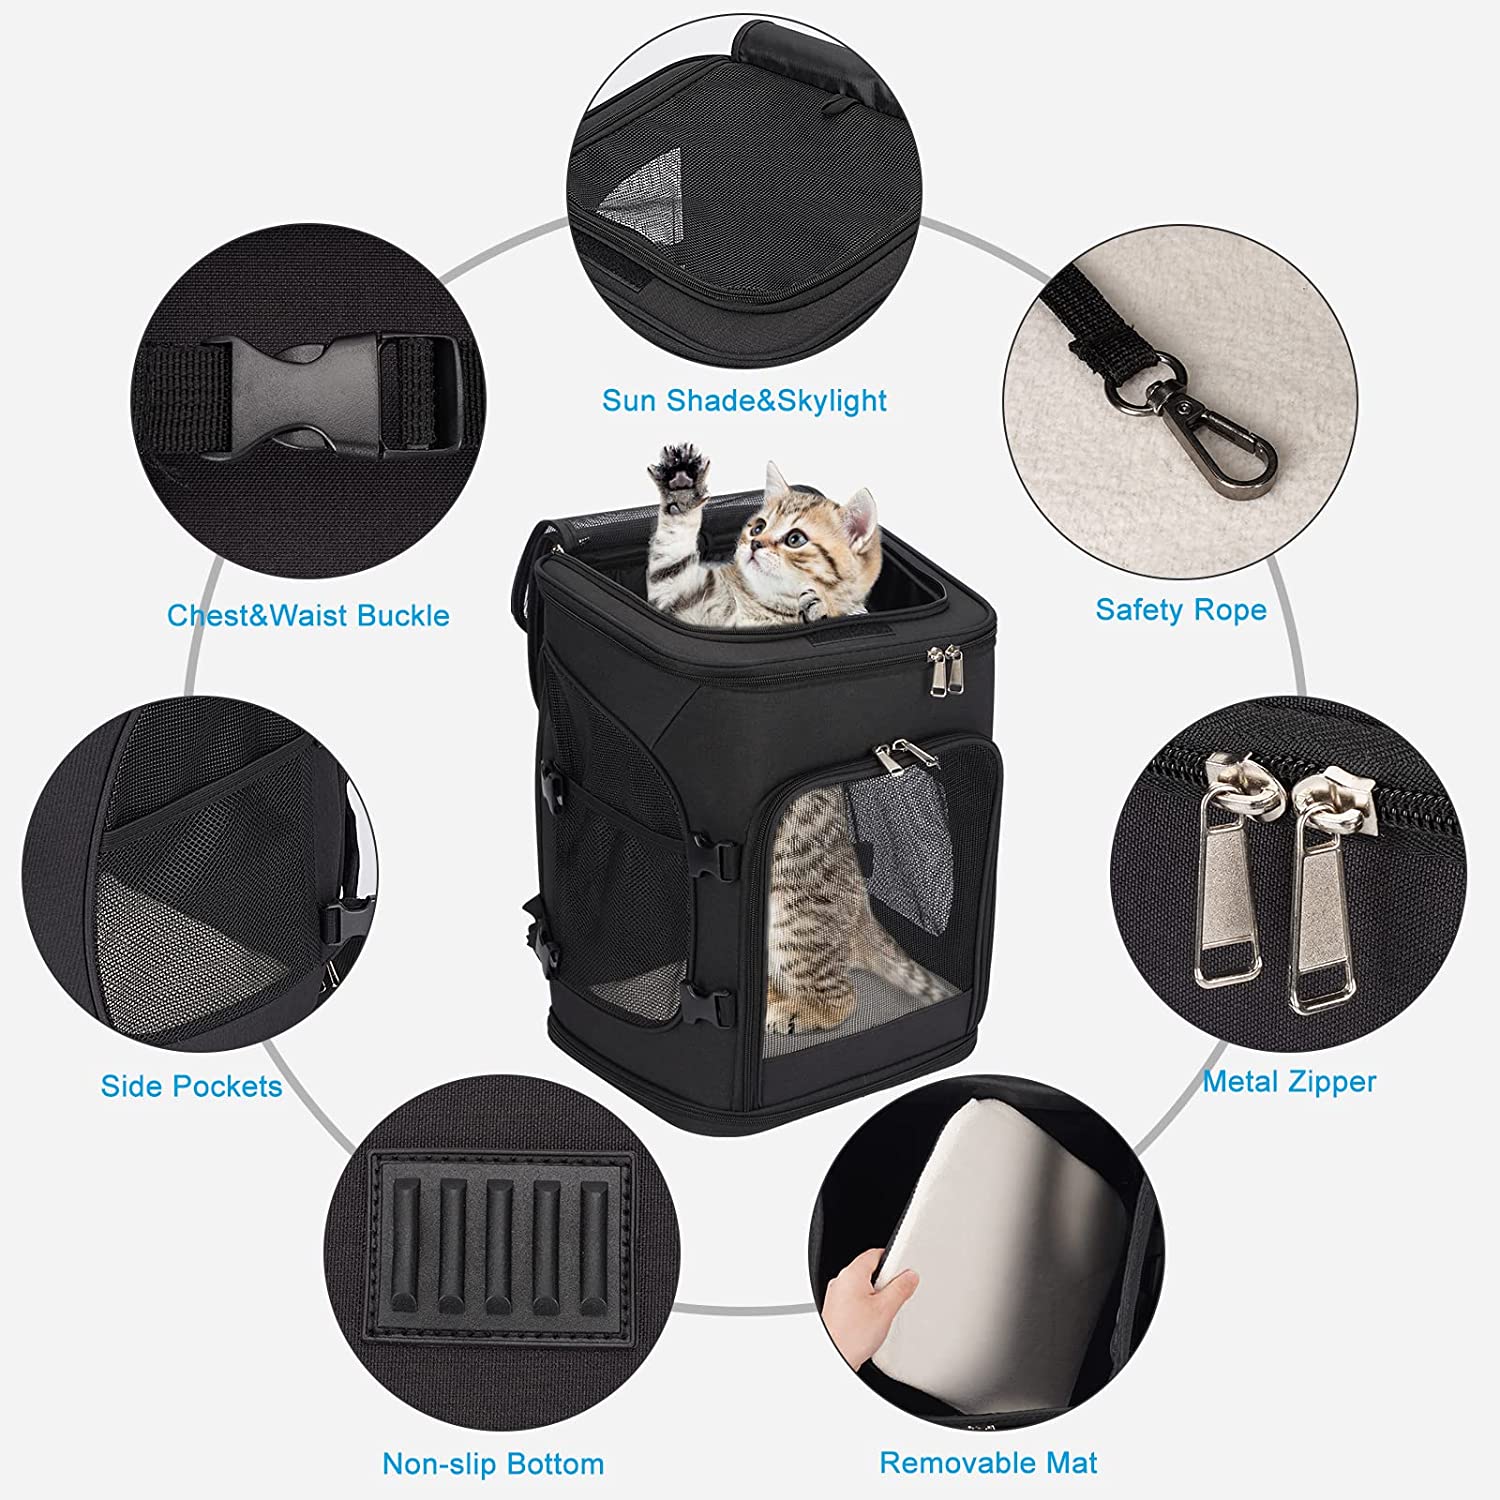 Pet Carrier Backpack with Detachable Side Pockets for Cats and Dogs, Expandable Cat Dog Puppy Carrier Backpacks, Airline Approved, for Travel / Hiking / Outdoor Use, Black